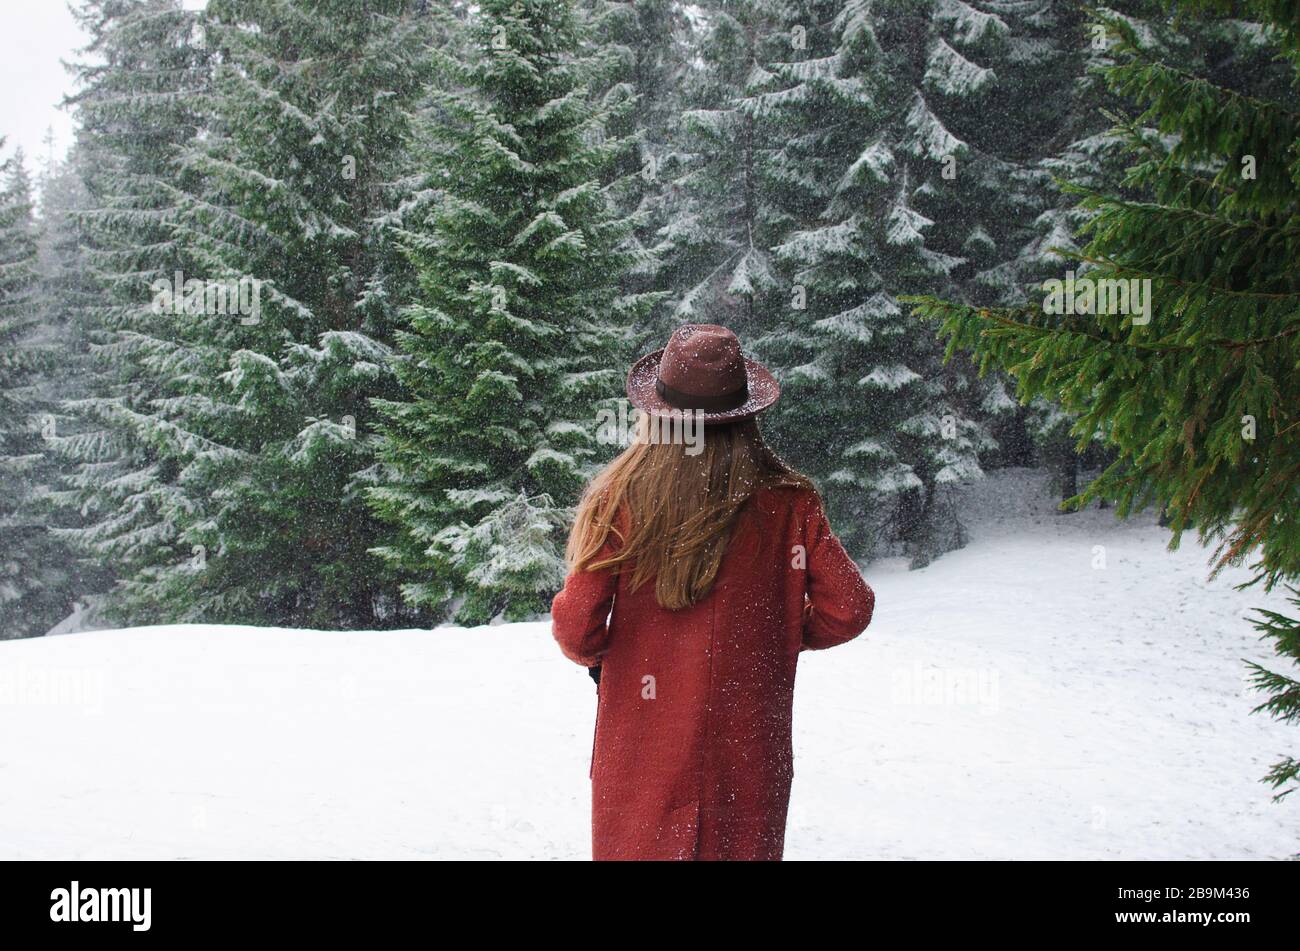 Girl looking on mountain view wearing hat and coat Stock Photo